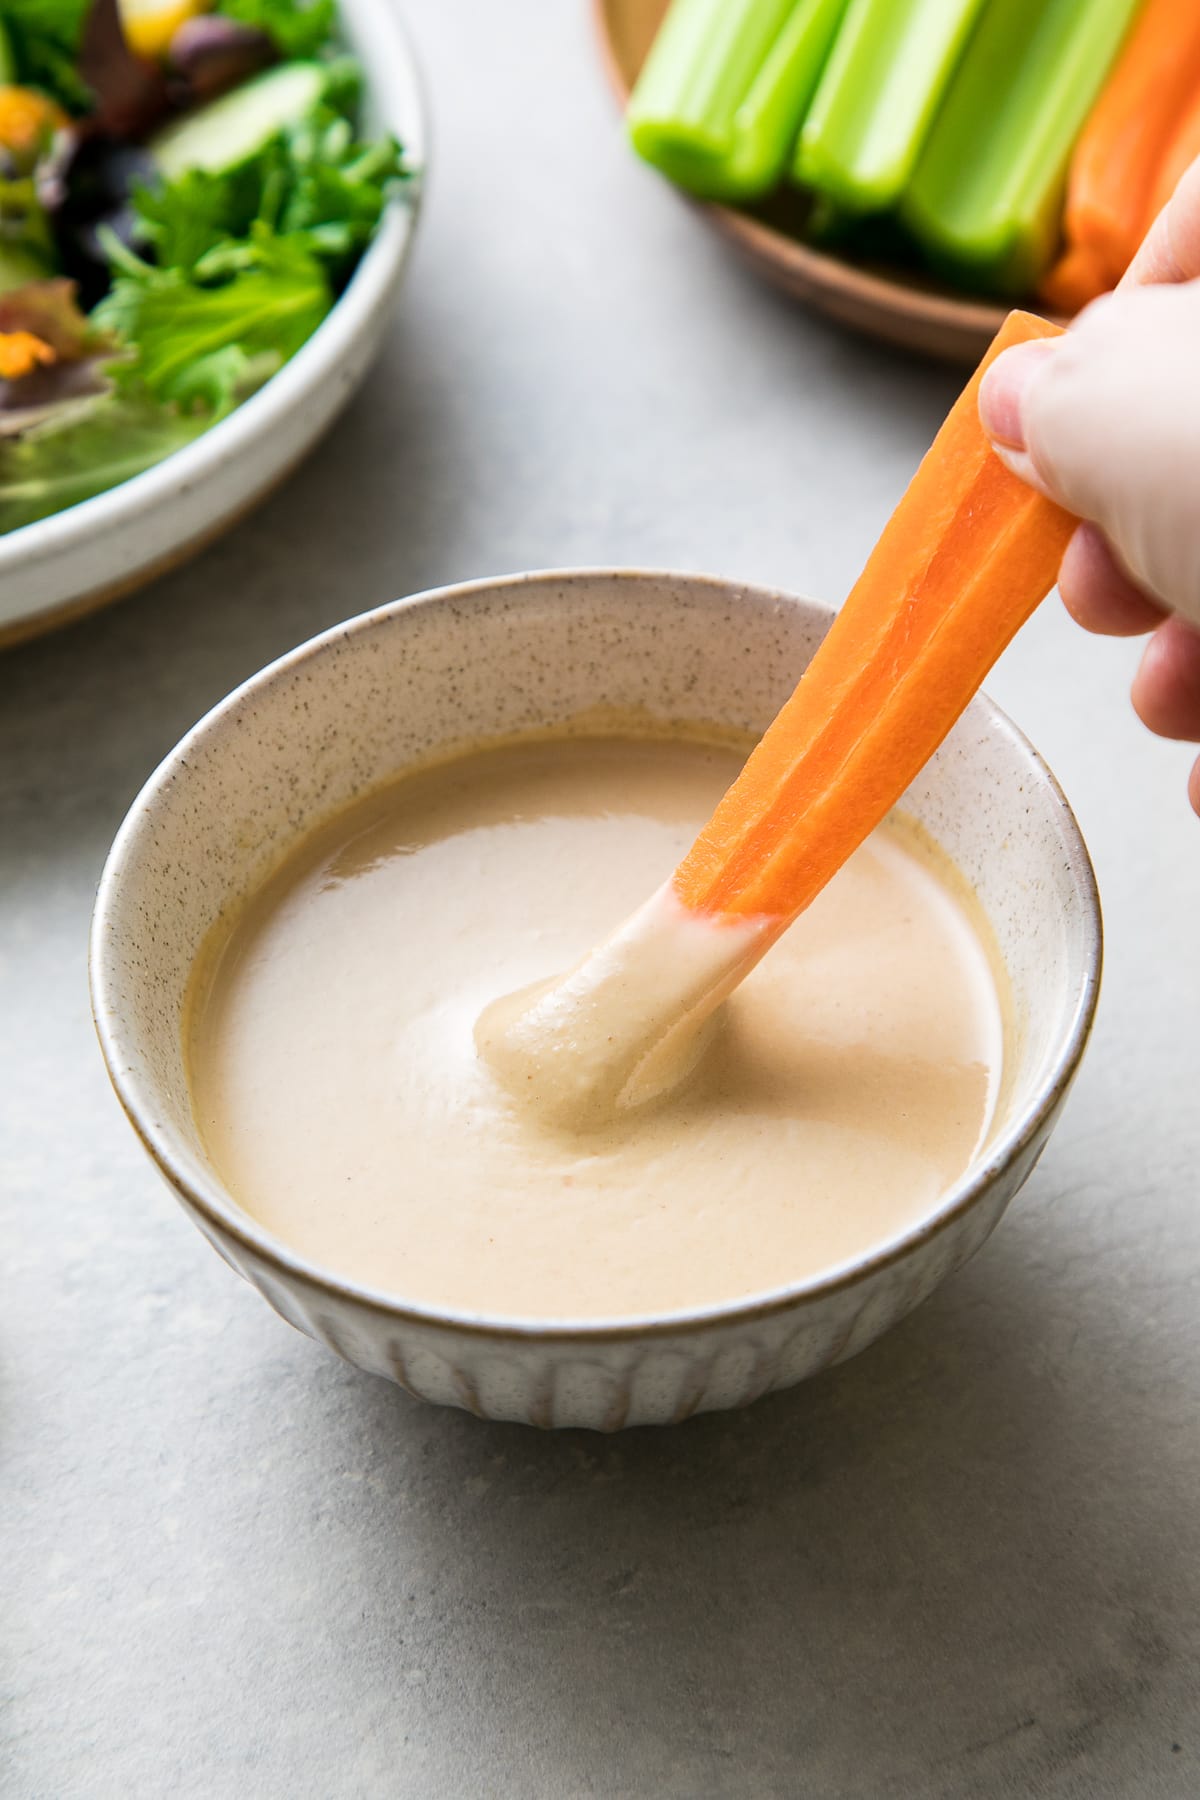 side angle view of carrot being dipped into healthy tahini miso dip.